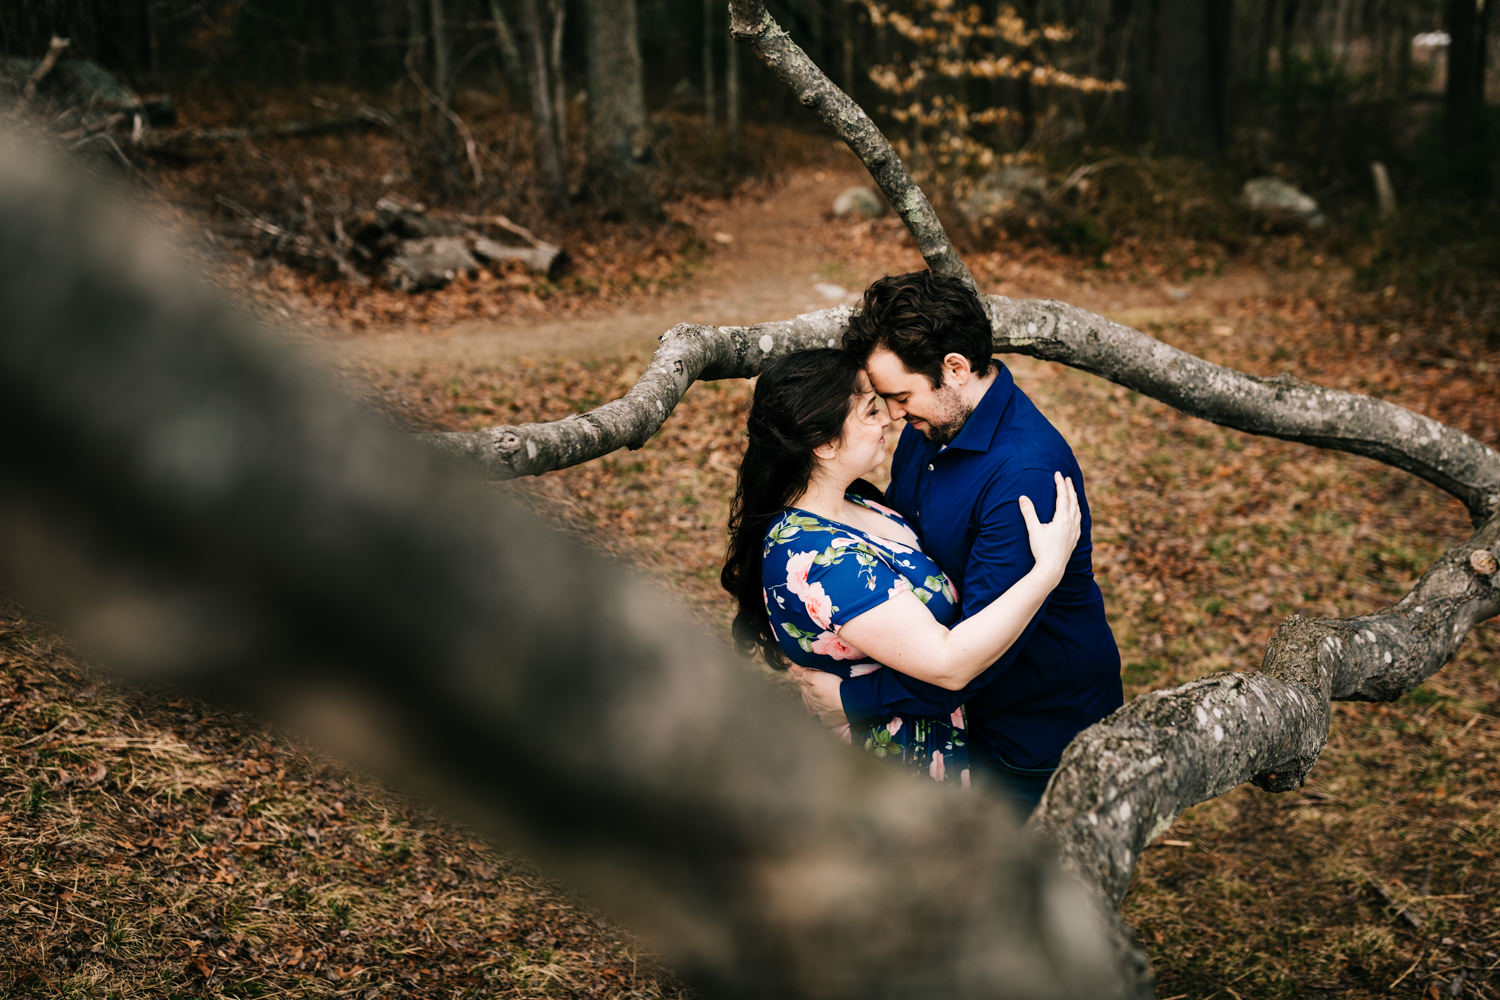 Husband and wife embracing in tree in forest near Boston